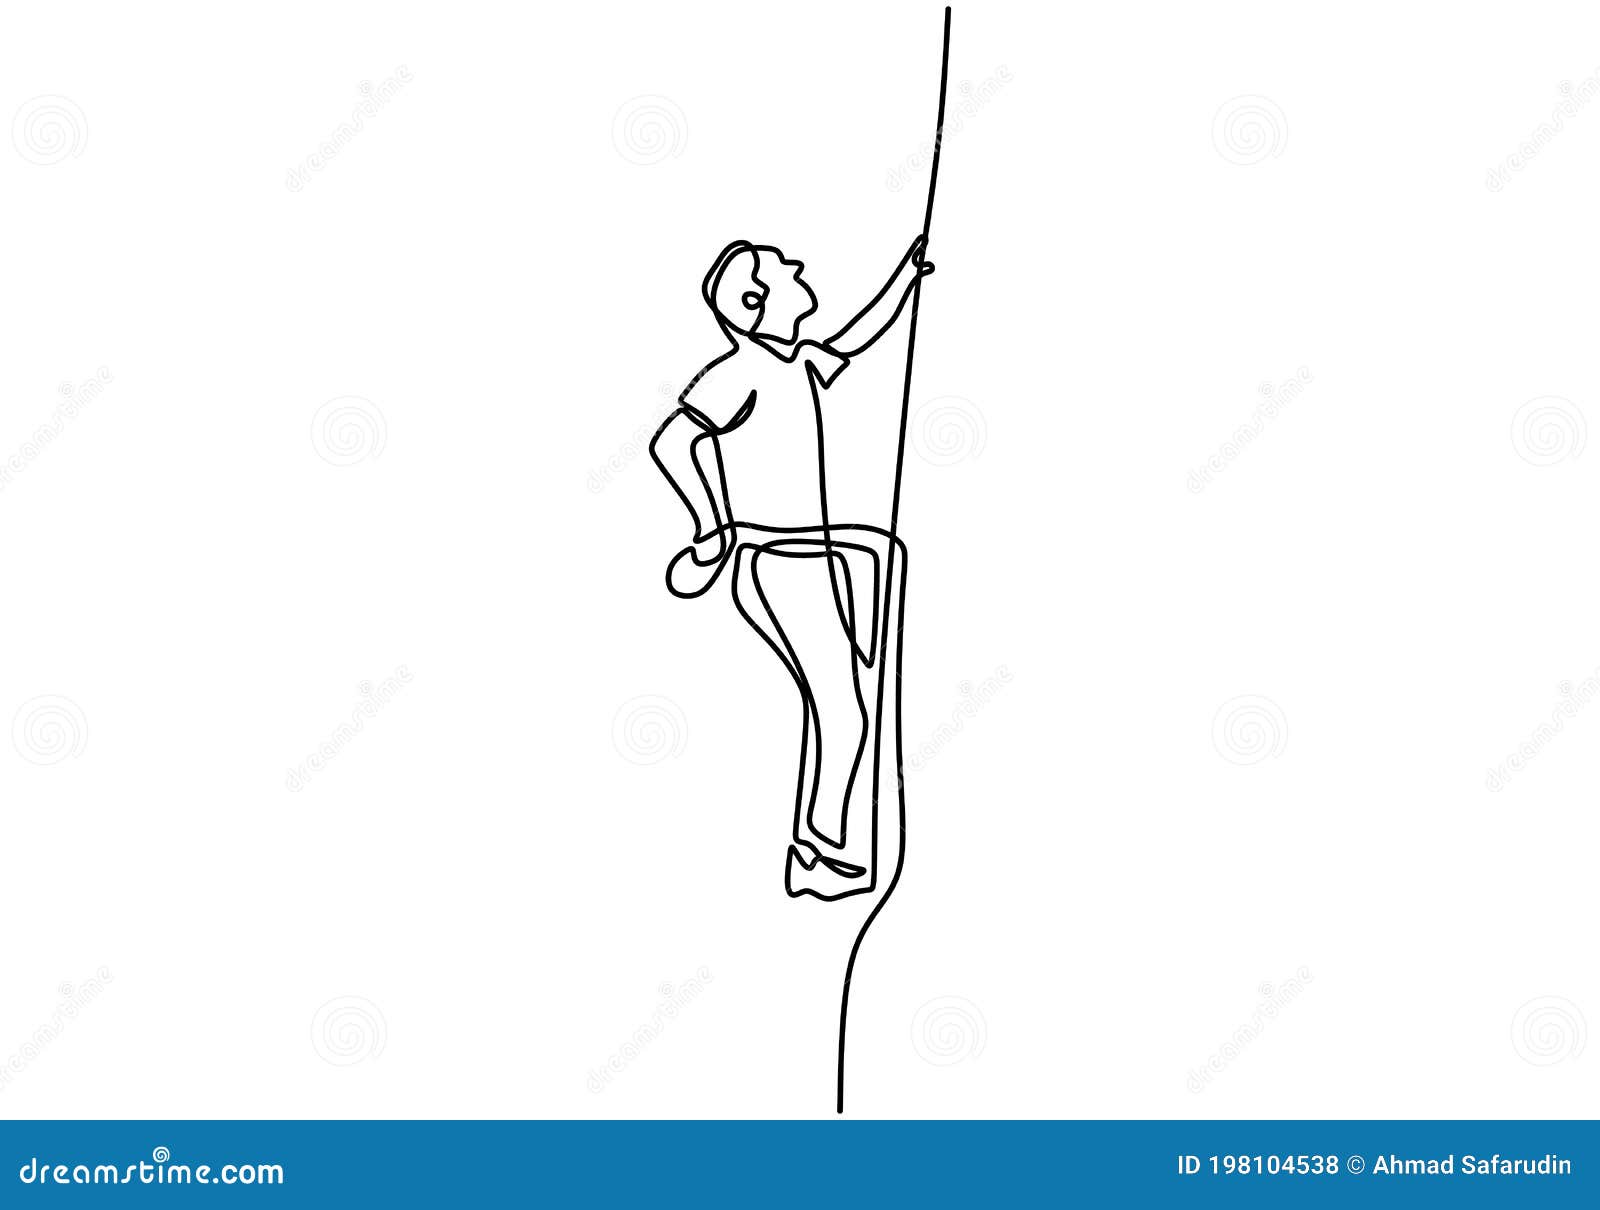 Continuous One Line Drawing of Man Doing Climbing. Energetic Young